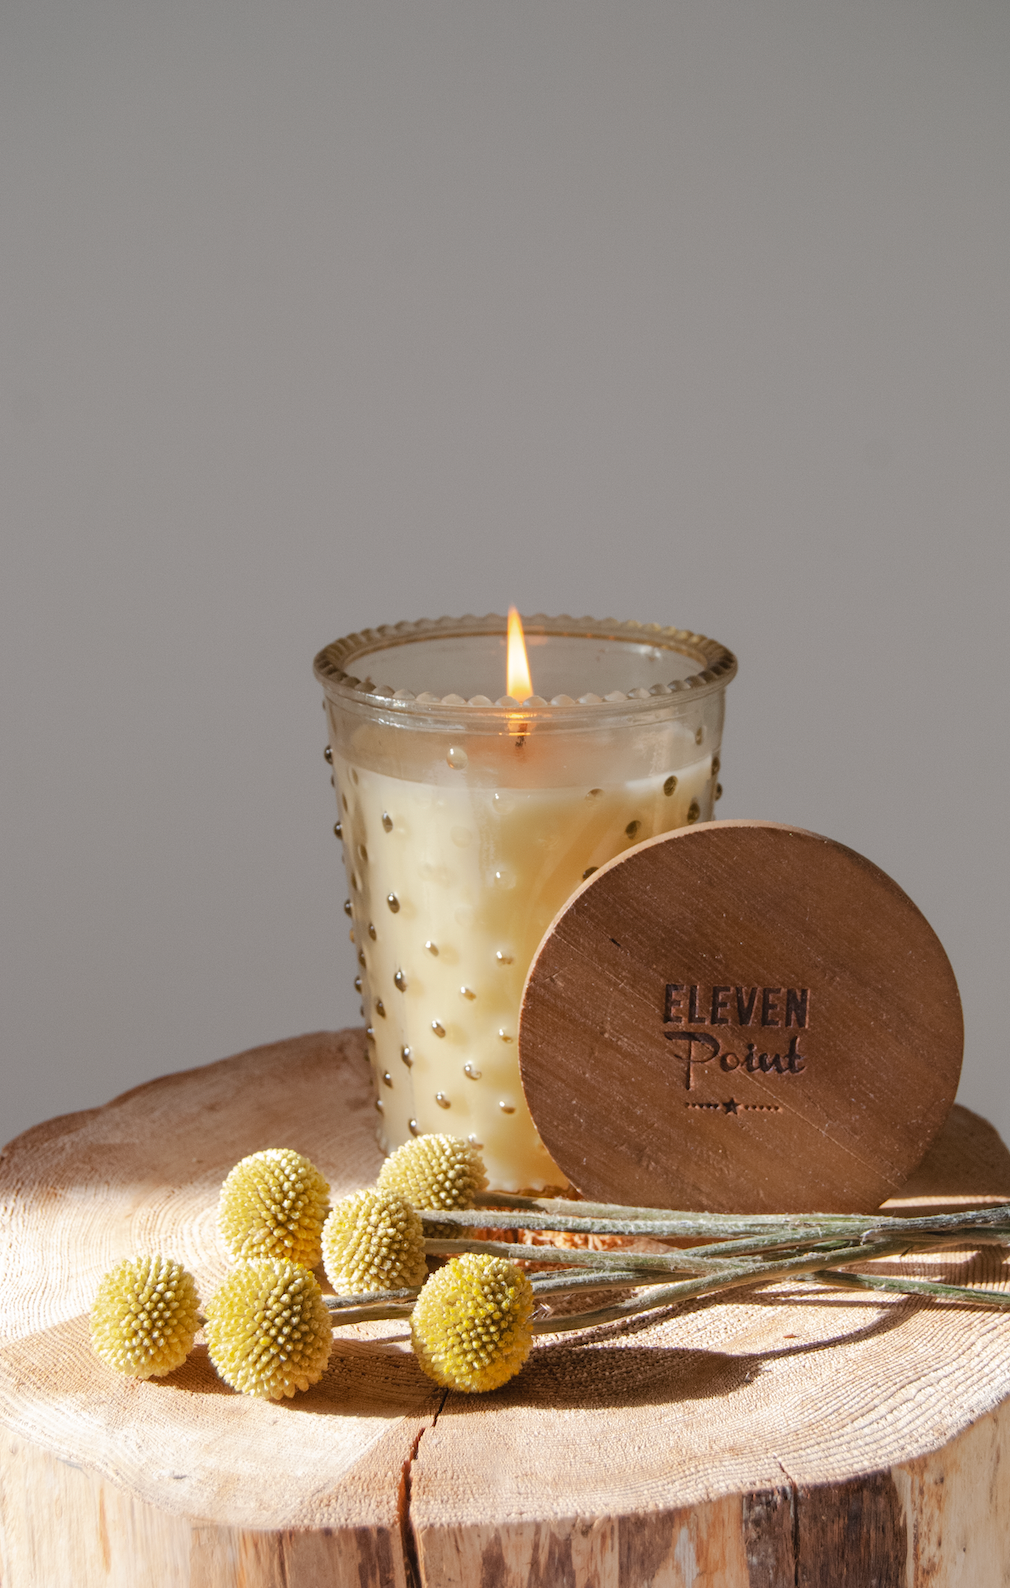 Tree Farm 2.0 Hobnail Candle in Butter Candle Eleven Point   